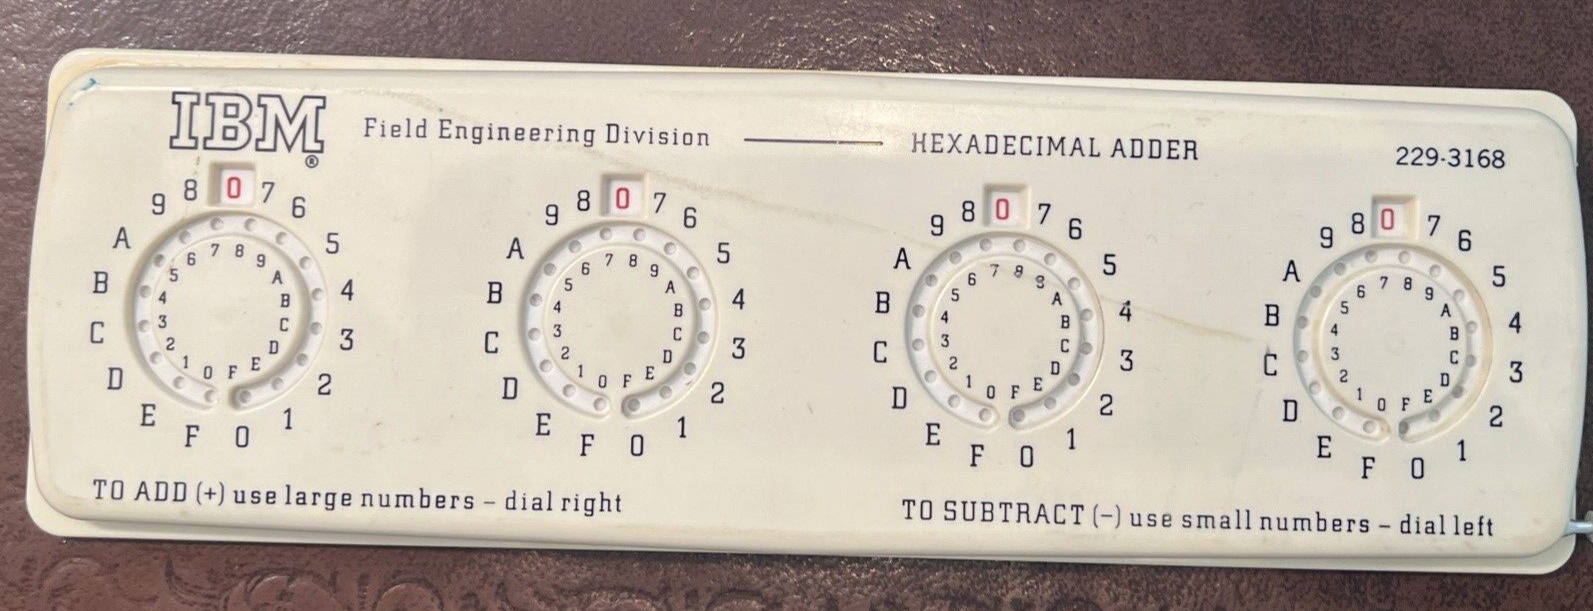 Vintage IBM Hexadecimal Adder (Field Engineering Division)  from the late 1960s